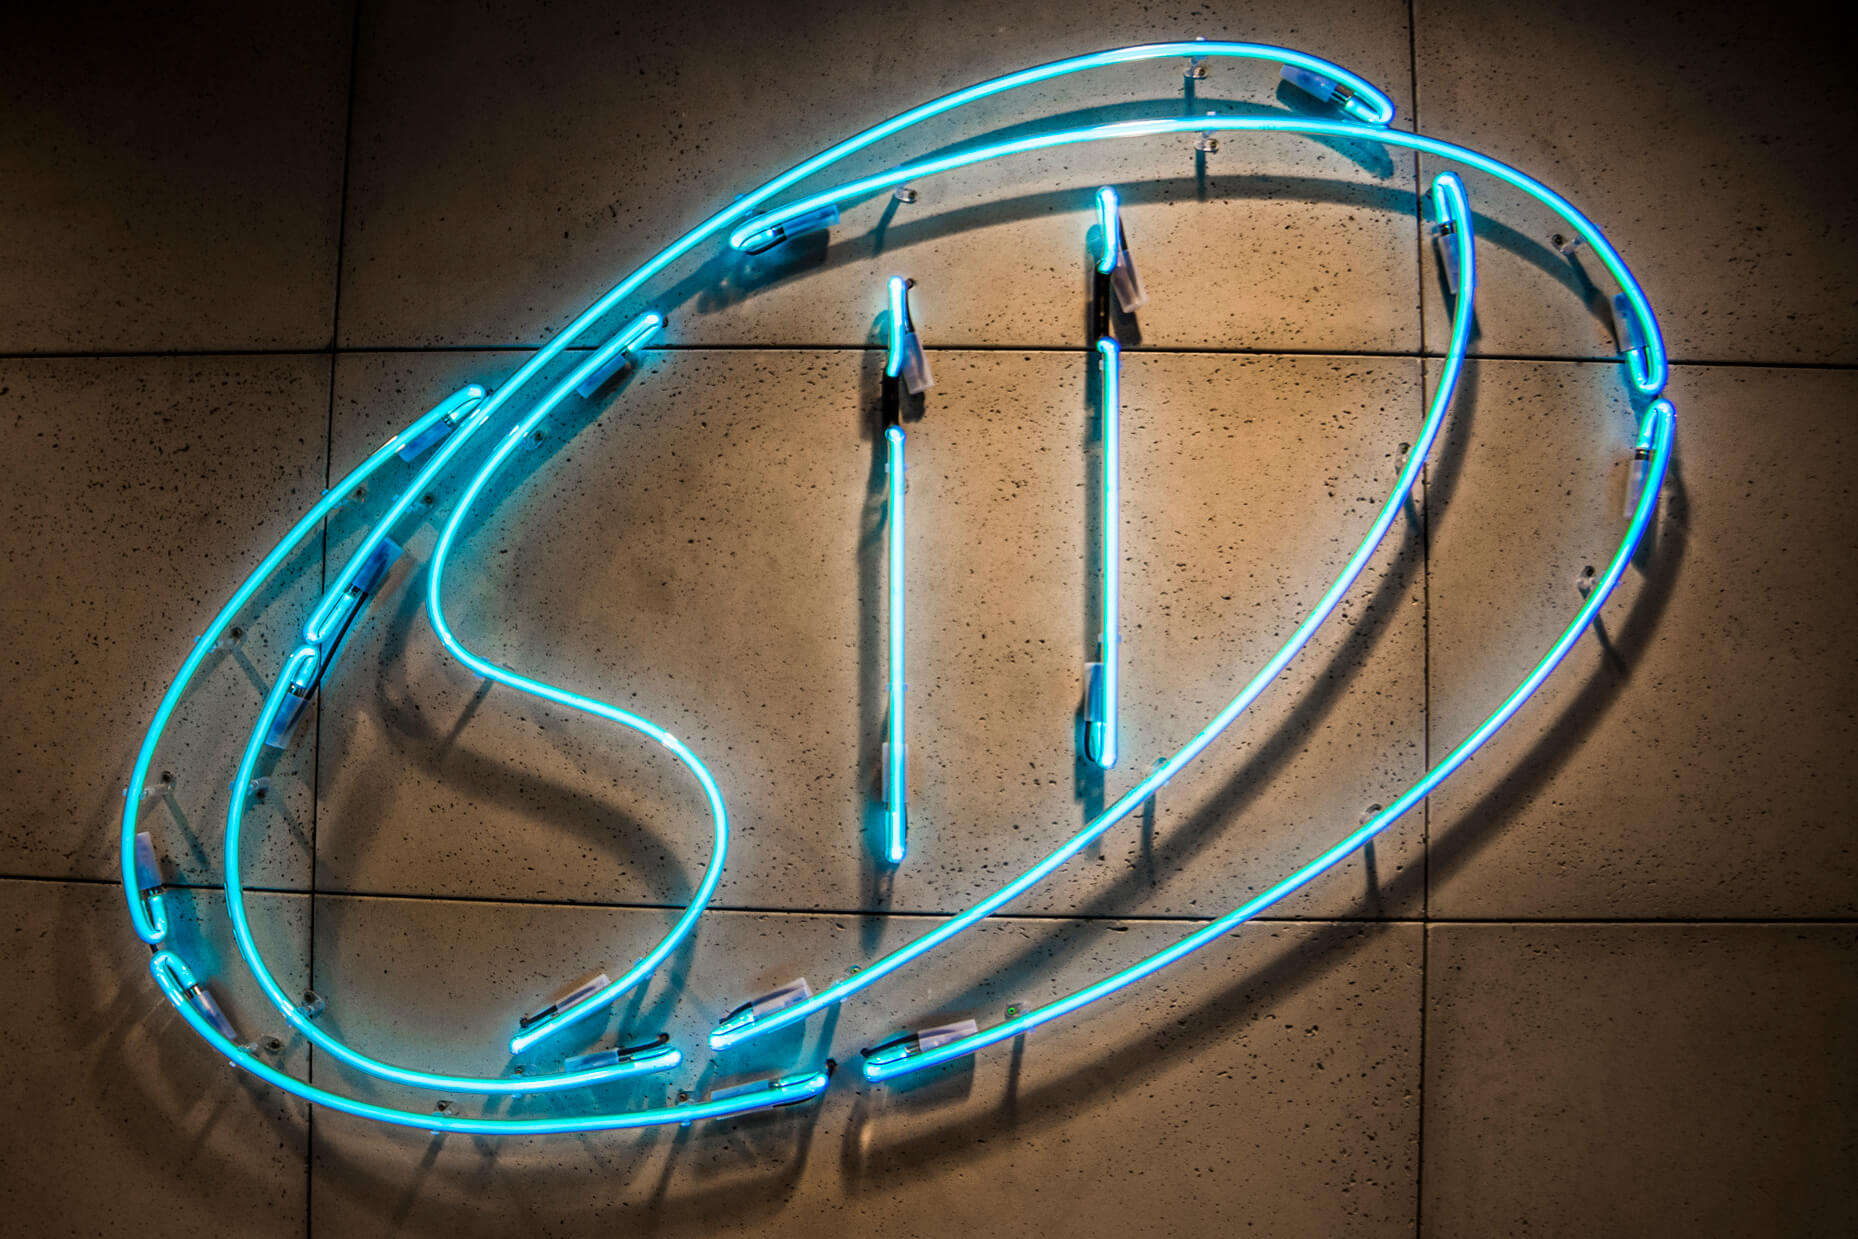 Sii - neon-sii-blue-round-neon-on-the-wall-in-office-neon-in-office-neon-in-company-neon-on-the-wall-with-decals-neon-on-decals-neon-on-orders-neon-new-brand-neon-glass-neon-neon-attached-to-the-wall-work-neon-inside-office